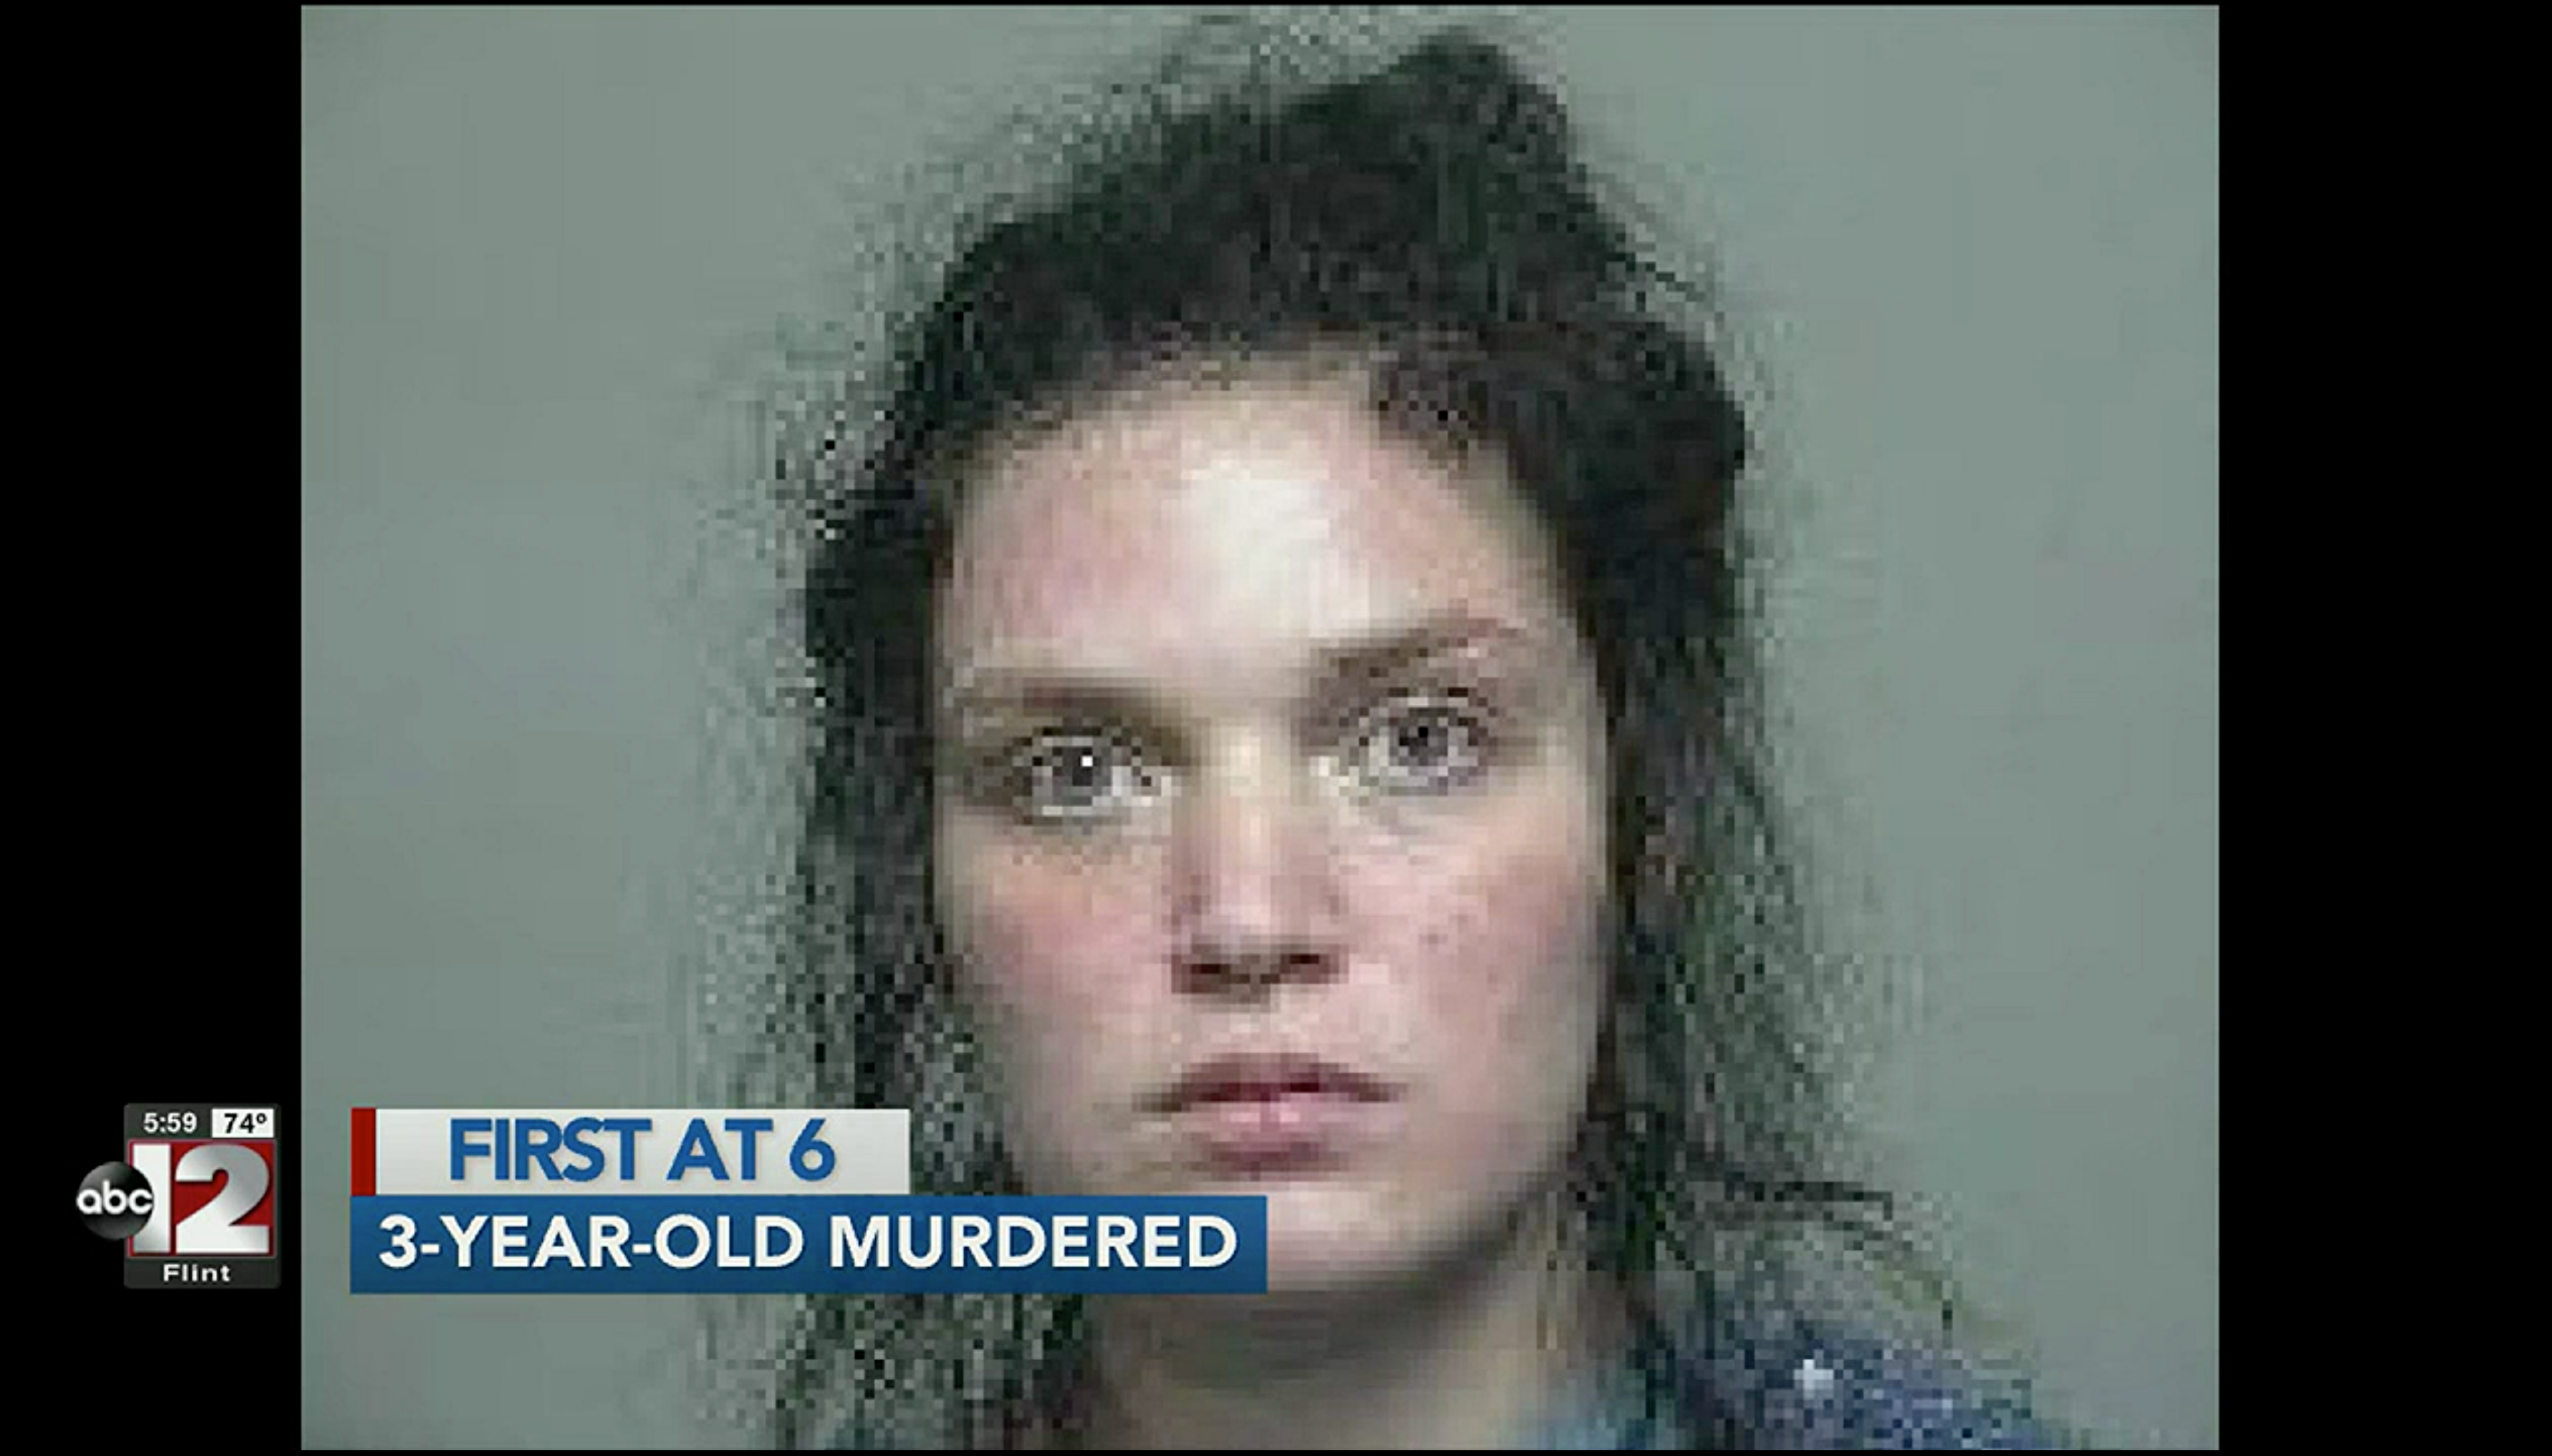 Michigan mother charged with murder after her 3-year-old daughter was found dead in garbage bag The Independent picture